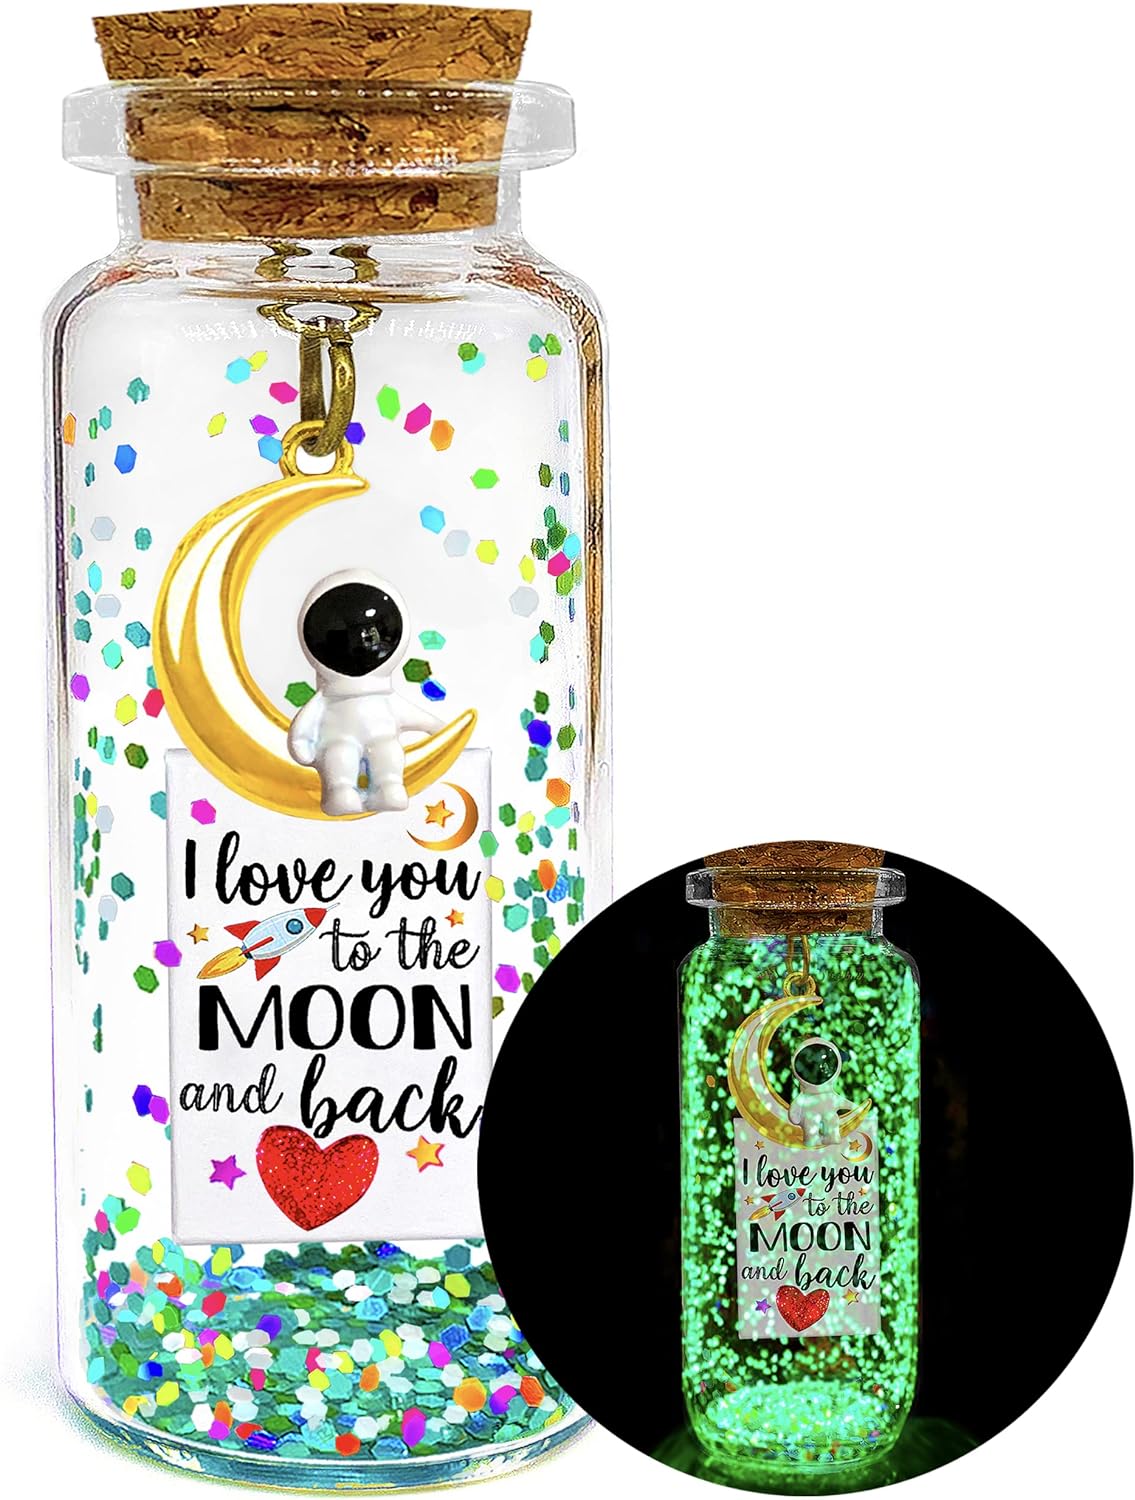 Anniversary Glow I Love You to the Moon and Back Message in a Bottle Presents Cute Romantic Gifts for Him Her Boyfriend Girlfriend Husband Wife Couples Fun Birthday Christmas Present Valentines Gift